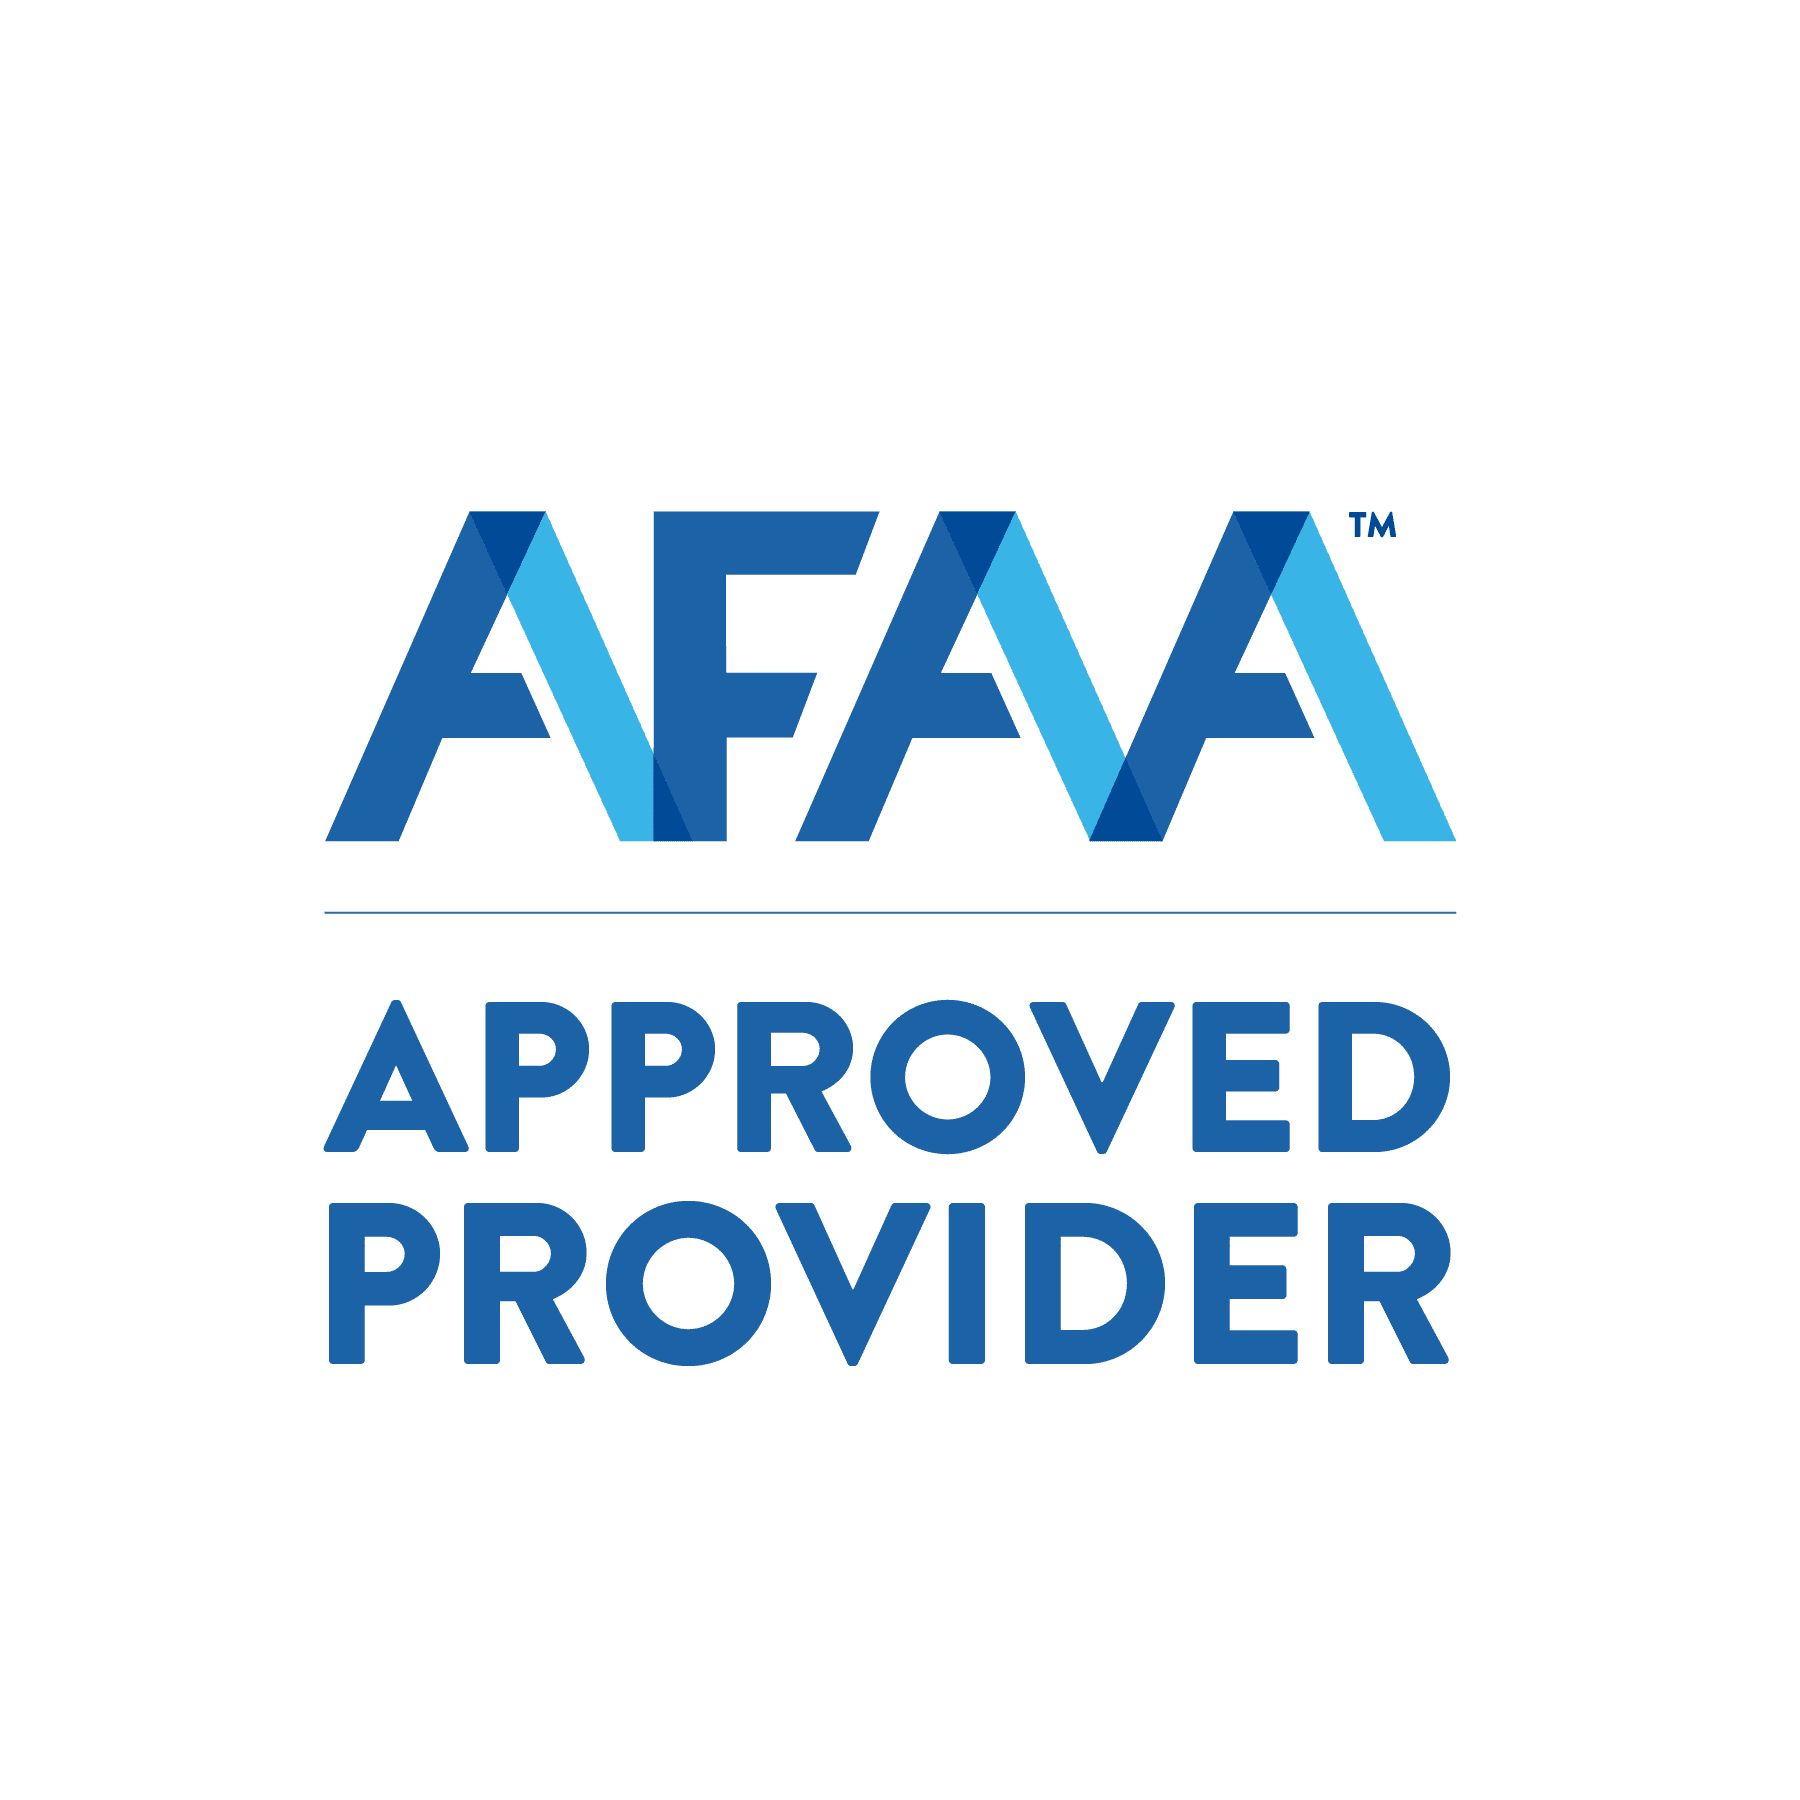 AFAA approved provider